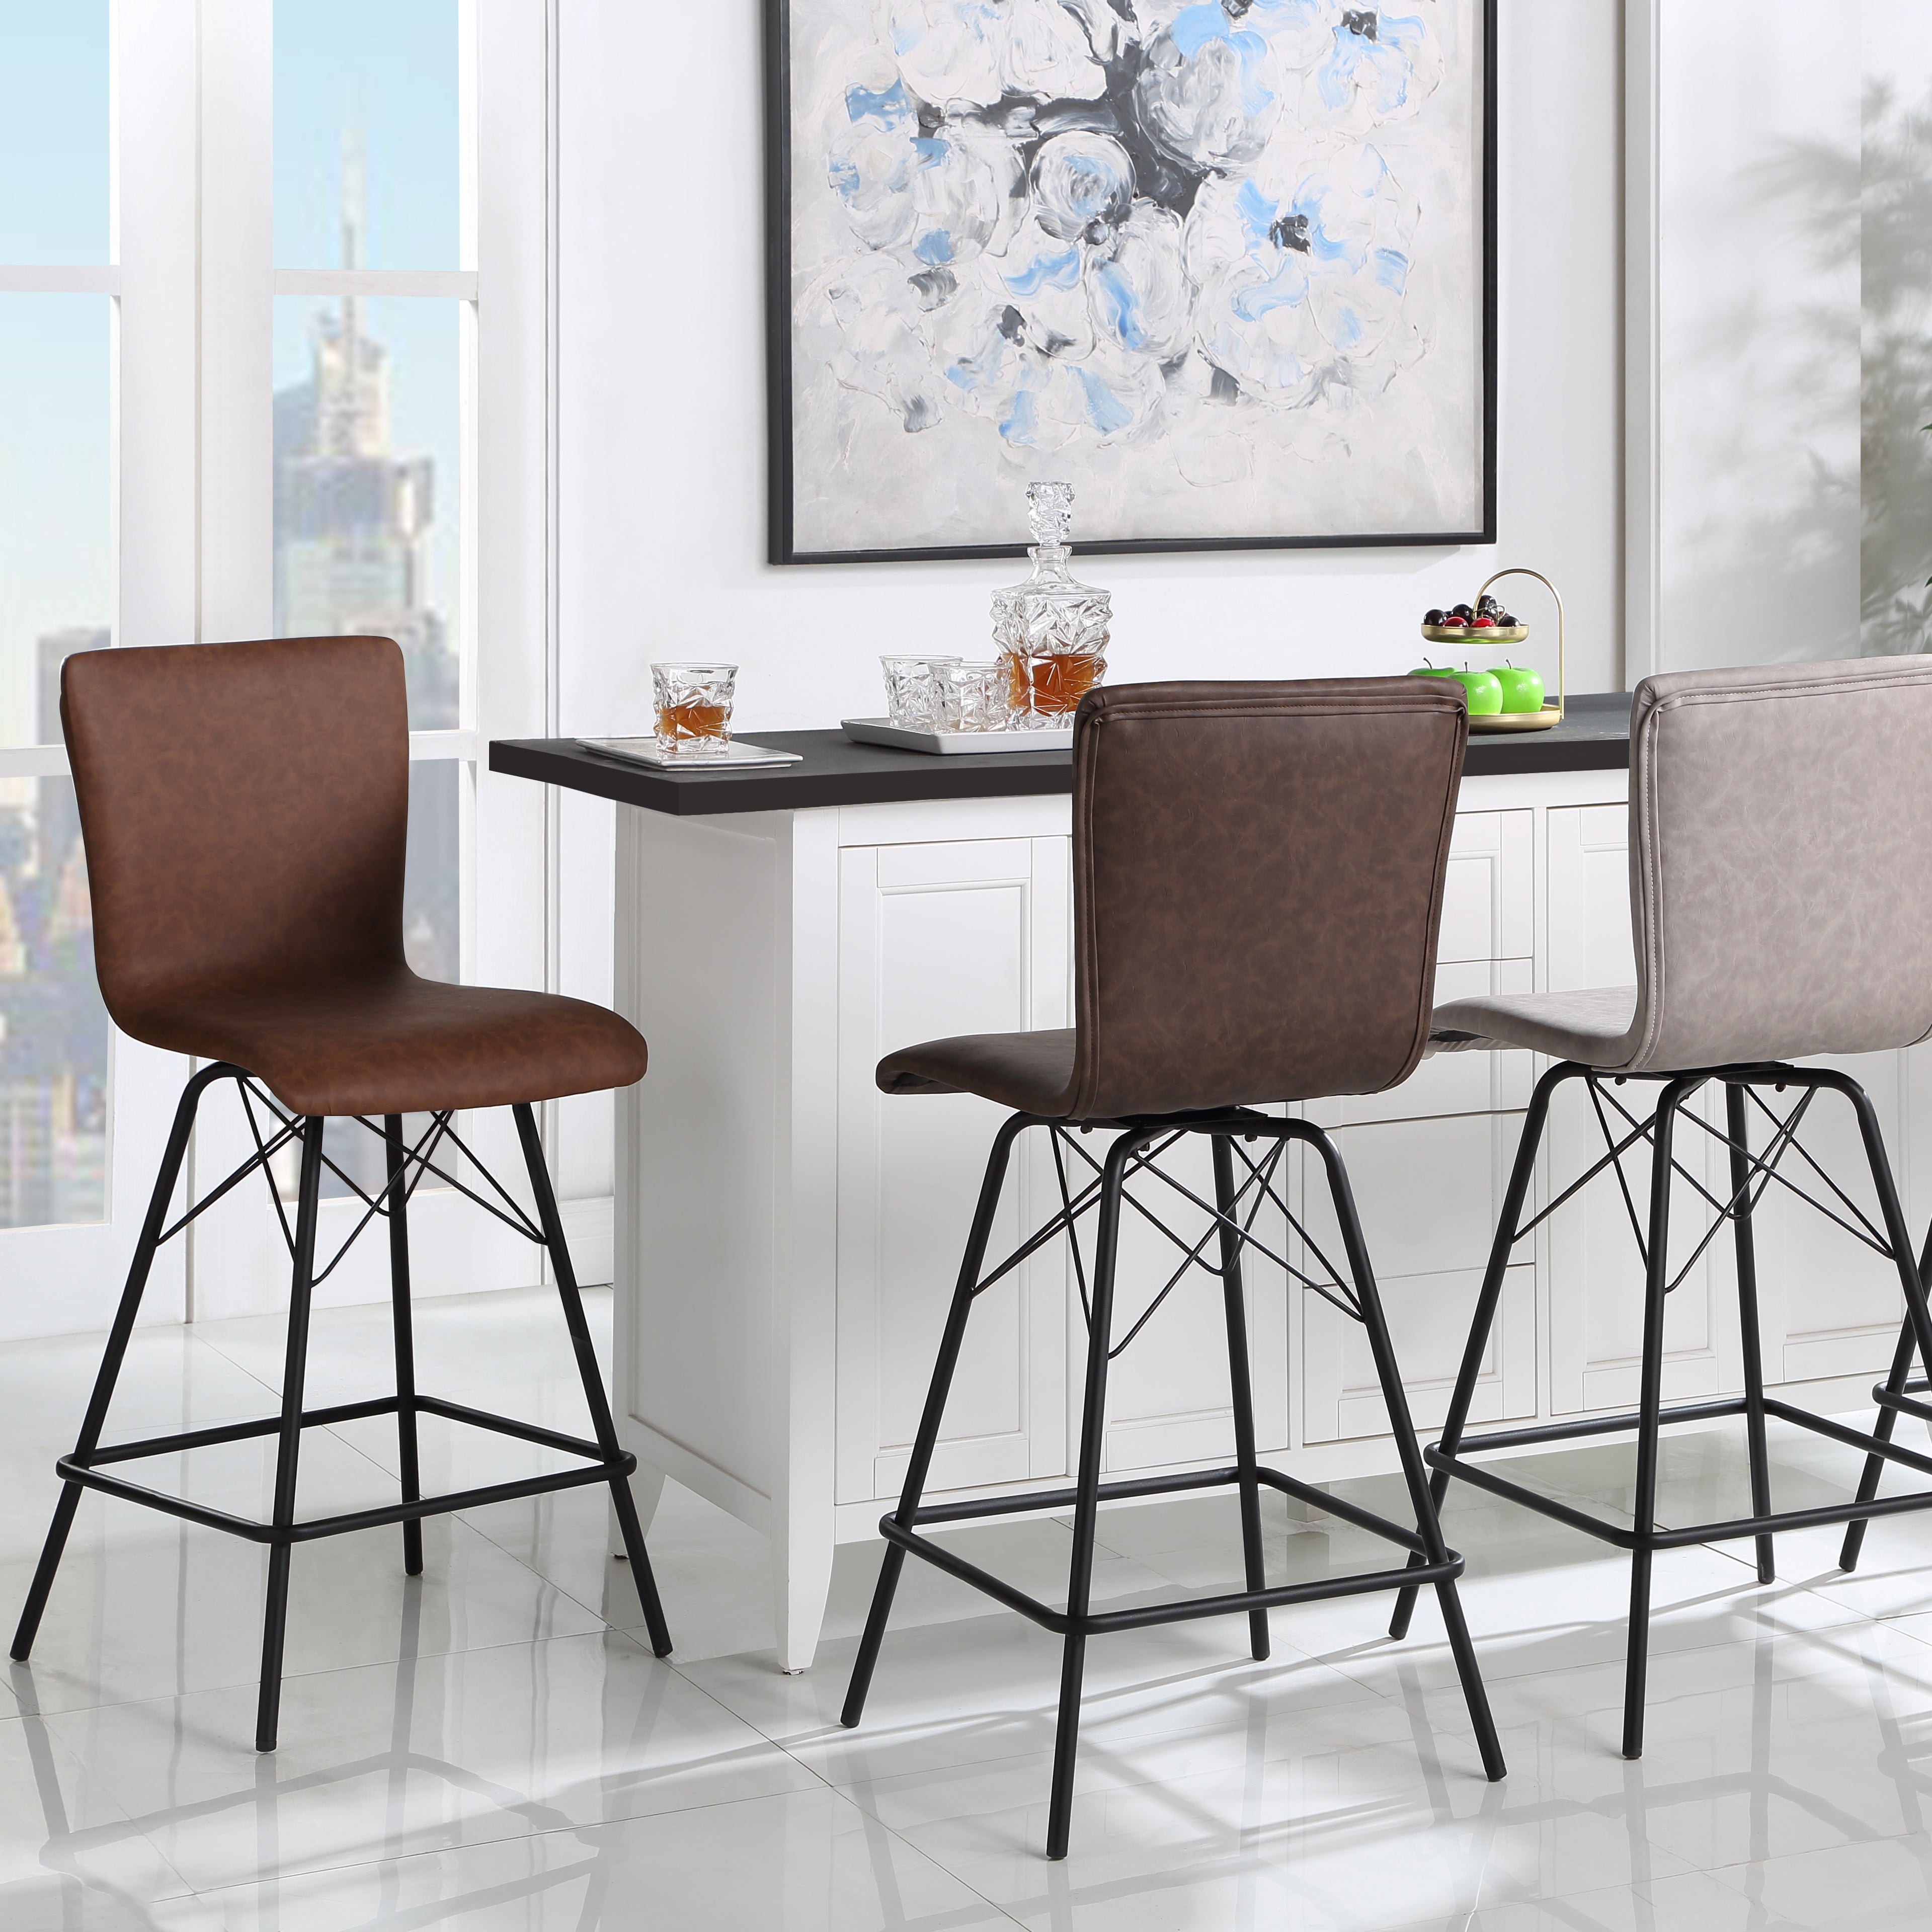 Kover Counter Chairs (Set of 2)